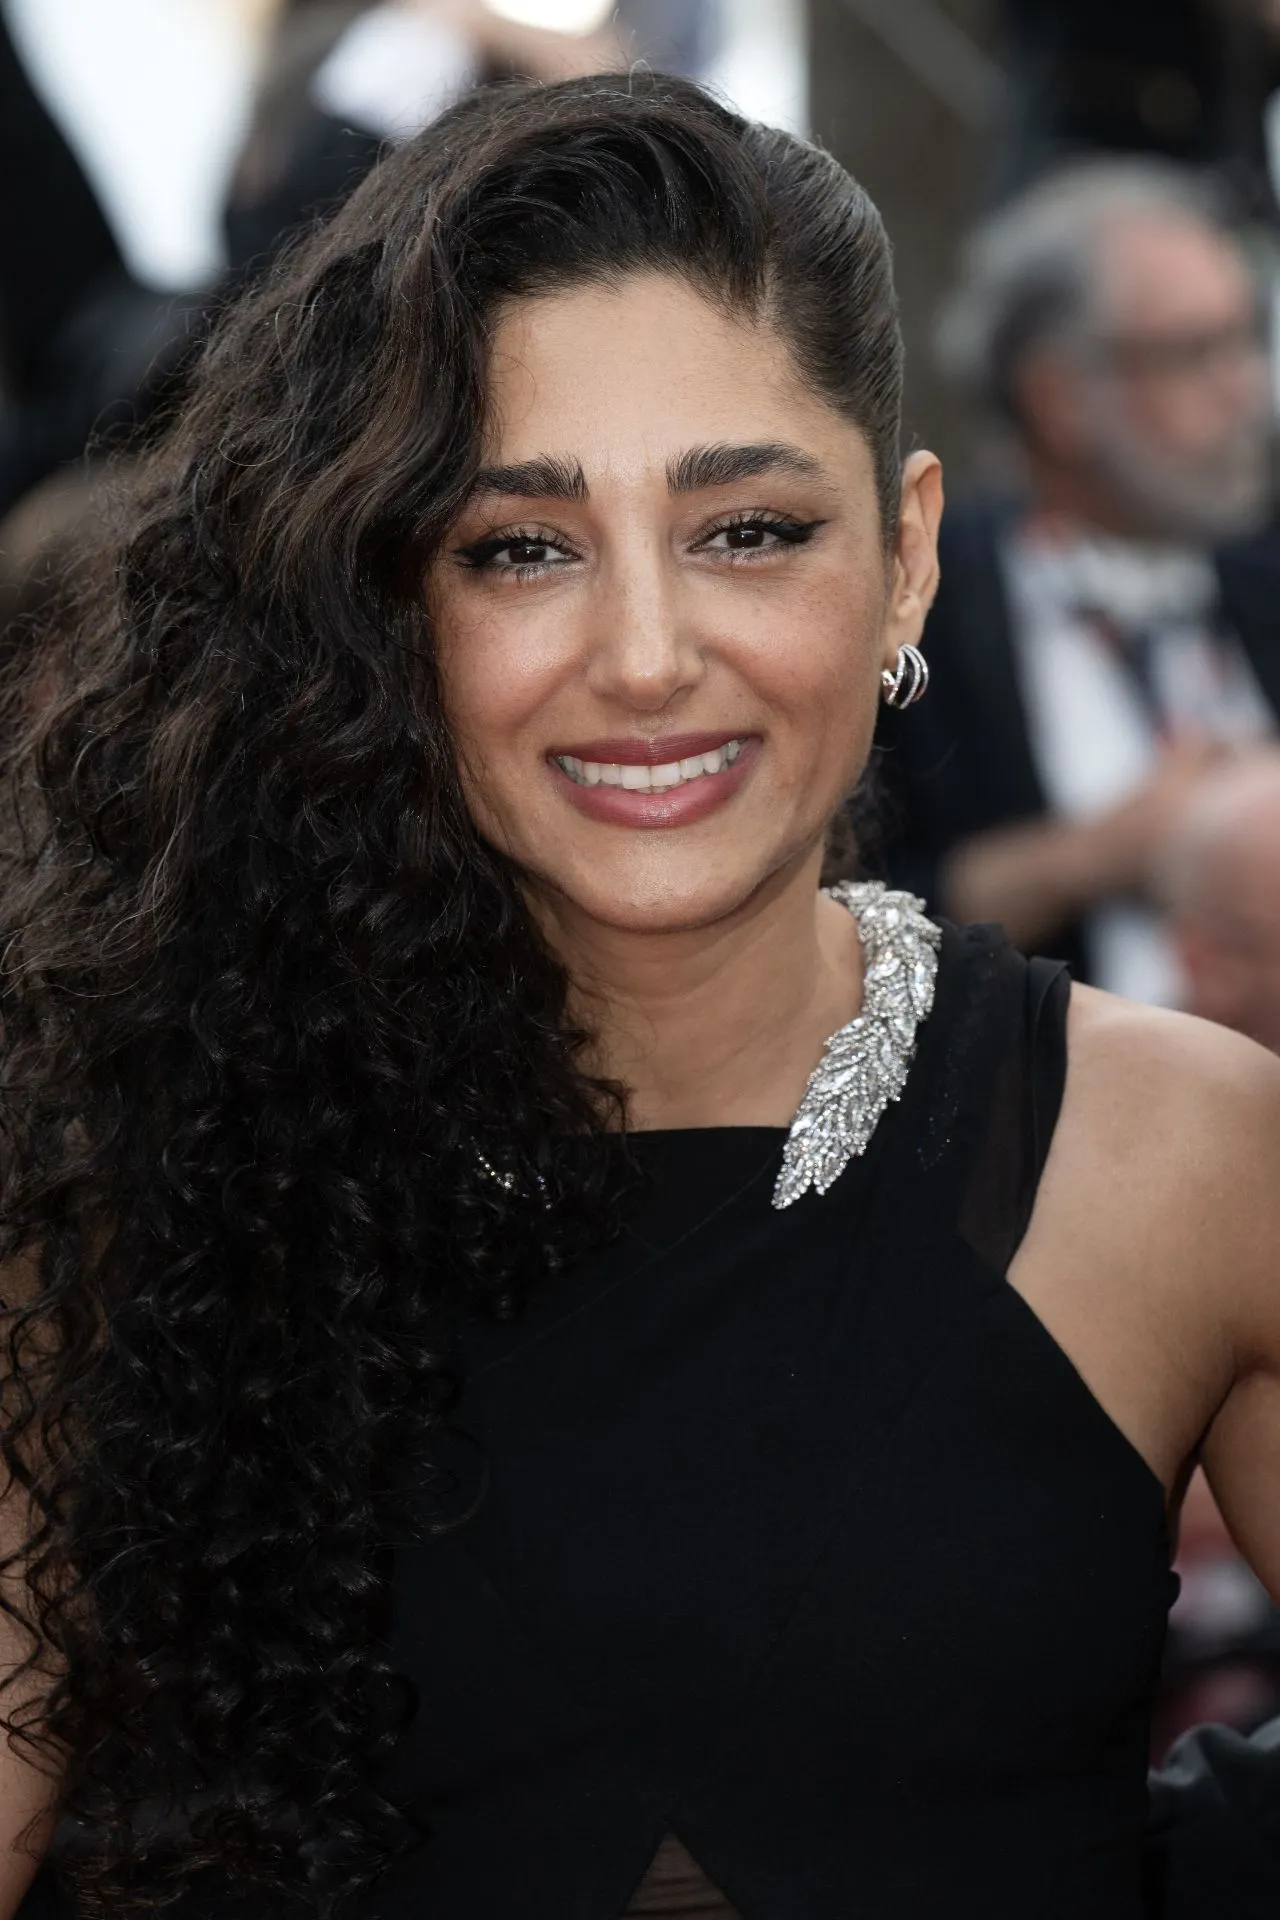 GOLSHIFTEH FARAHANI AT THE MOST PRECIOUS OF CARGOES PREMIERE AT CANNES FILM FESTIVAL3